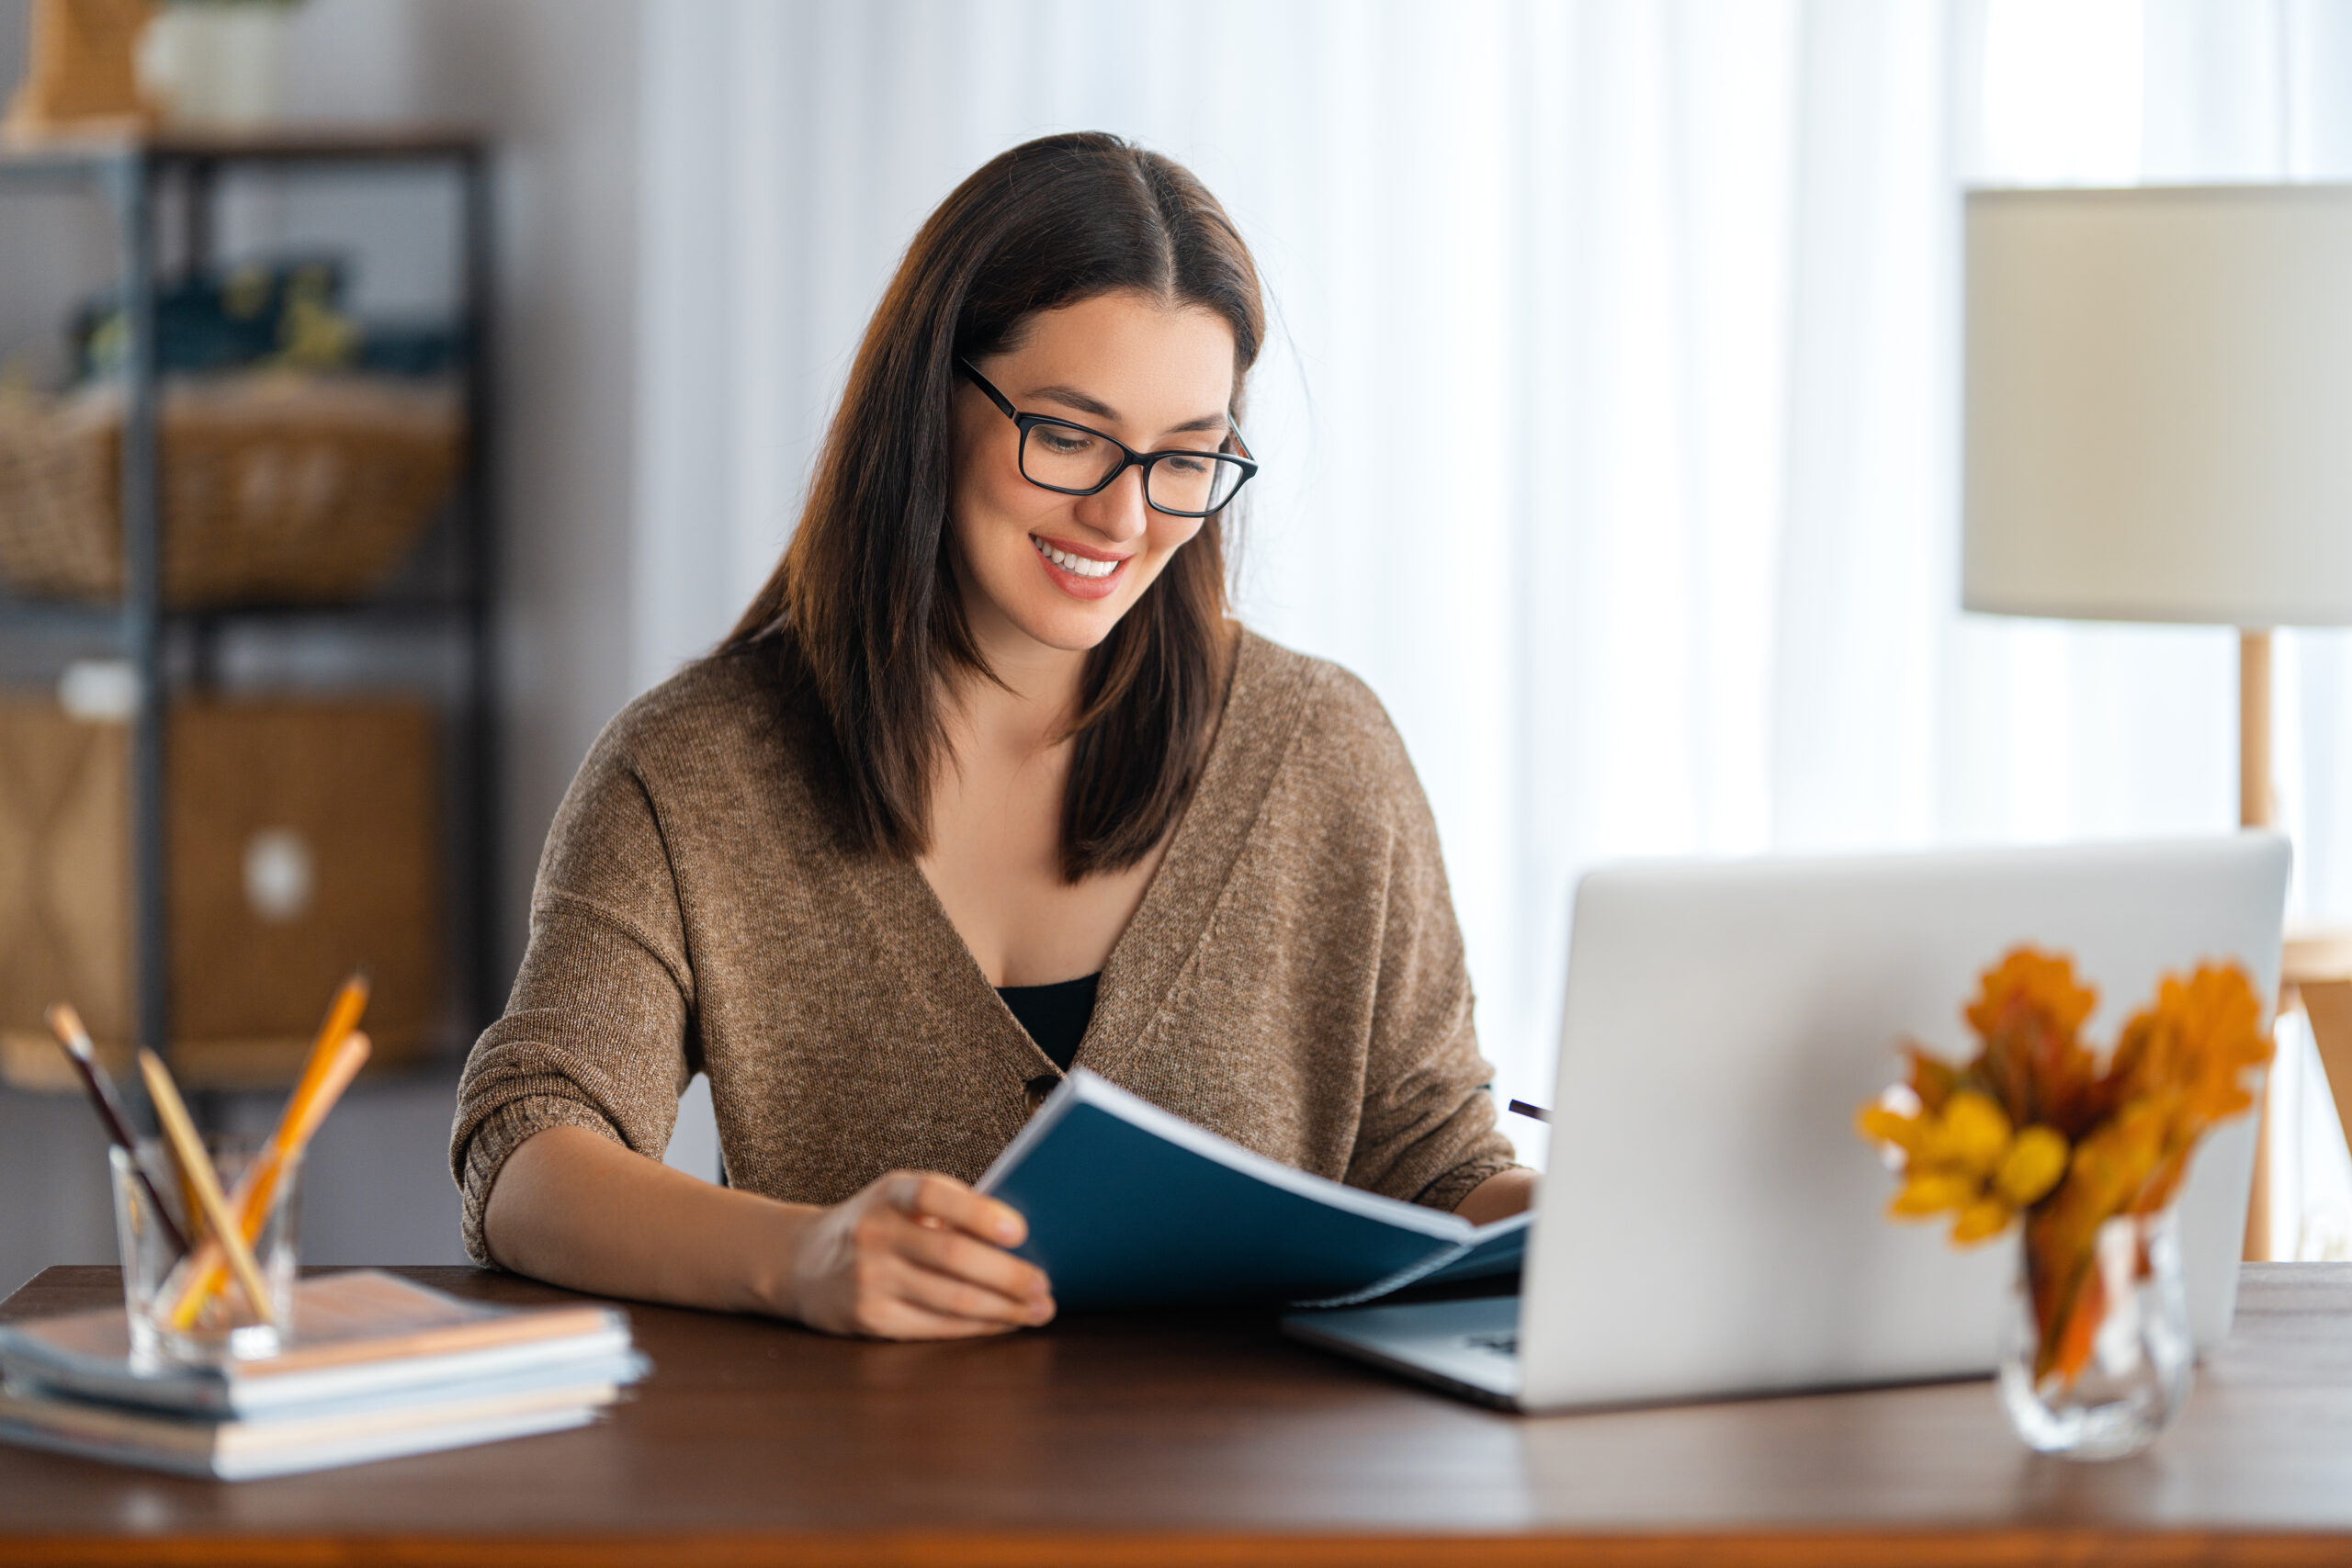 young woman working at desk smiling looking down at paper planner